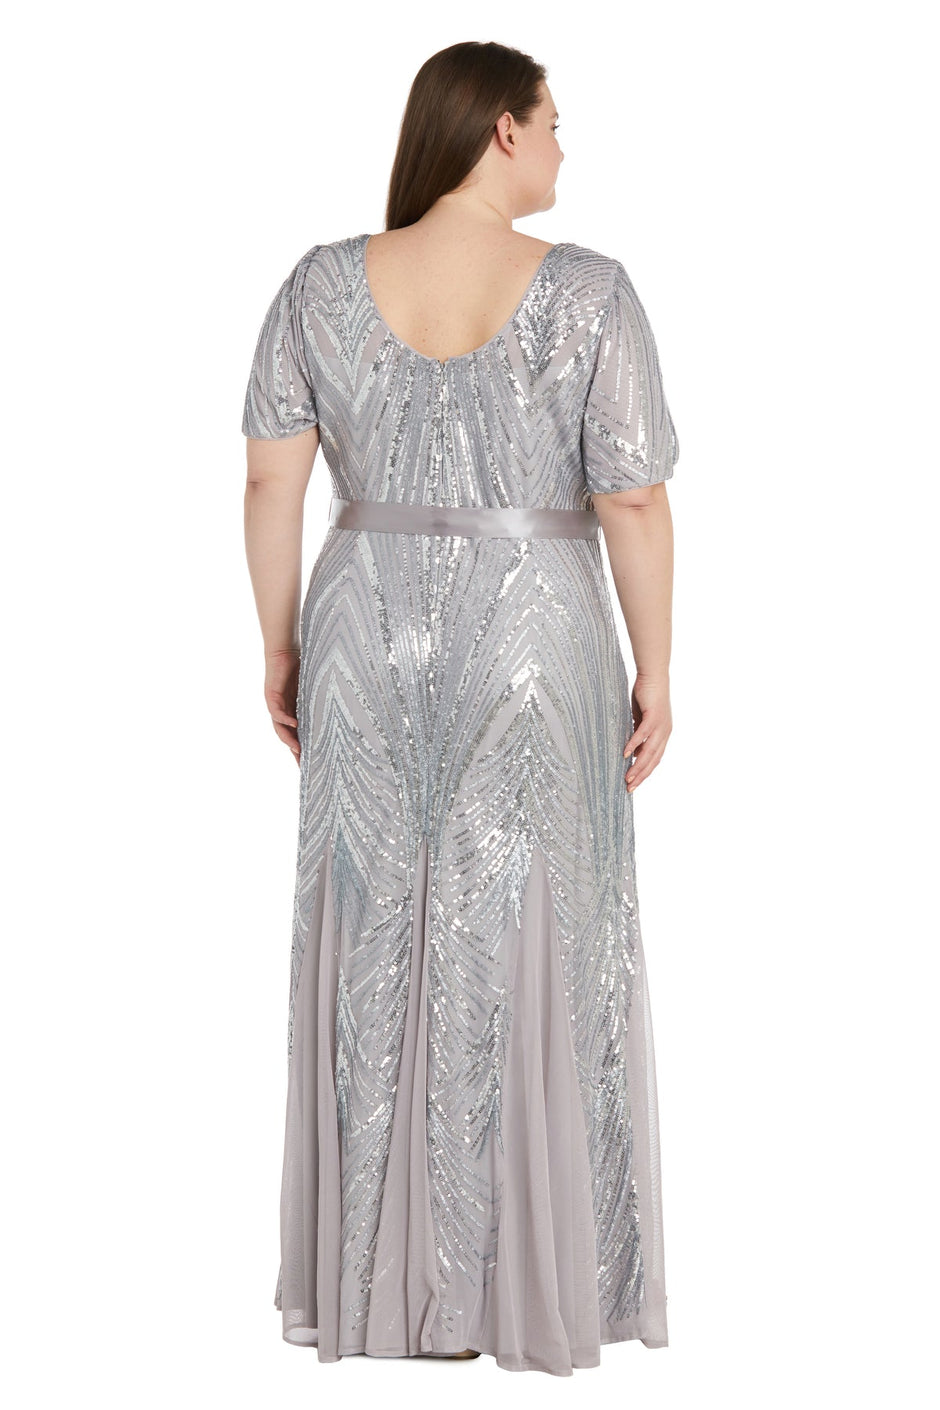 Plus Size Mother Of The Bride Dresses With jackets Tea length | SleekTrends